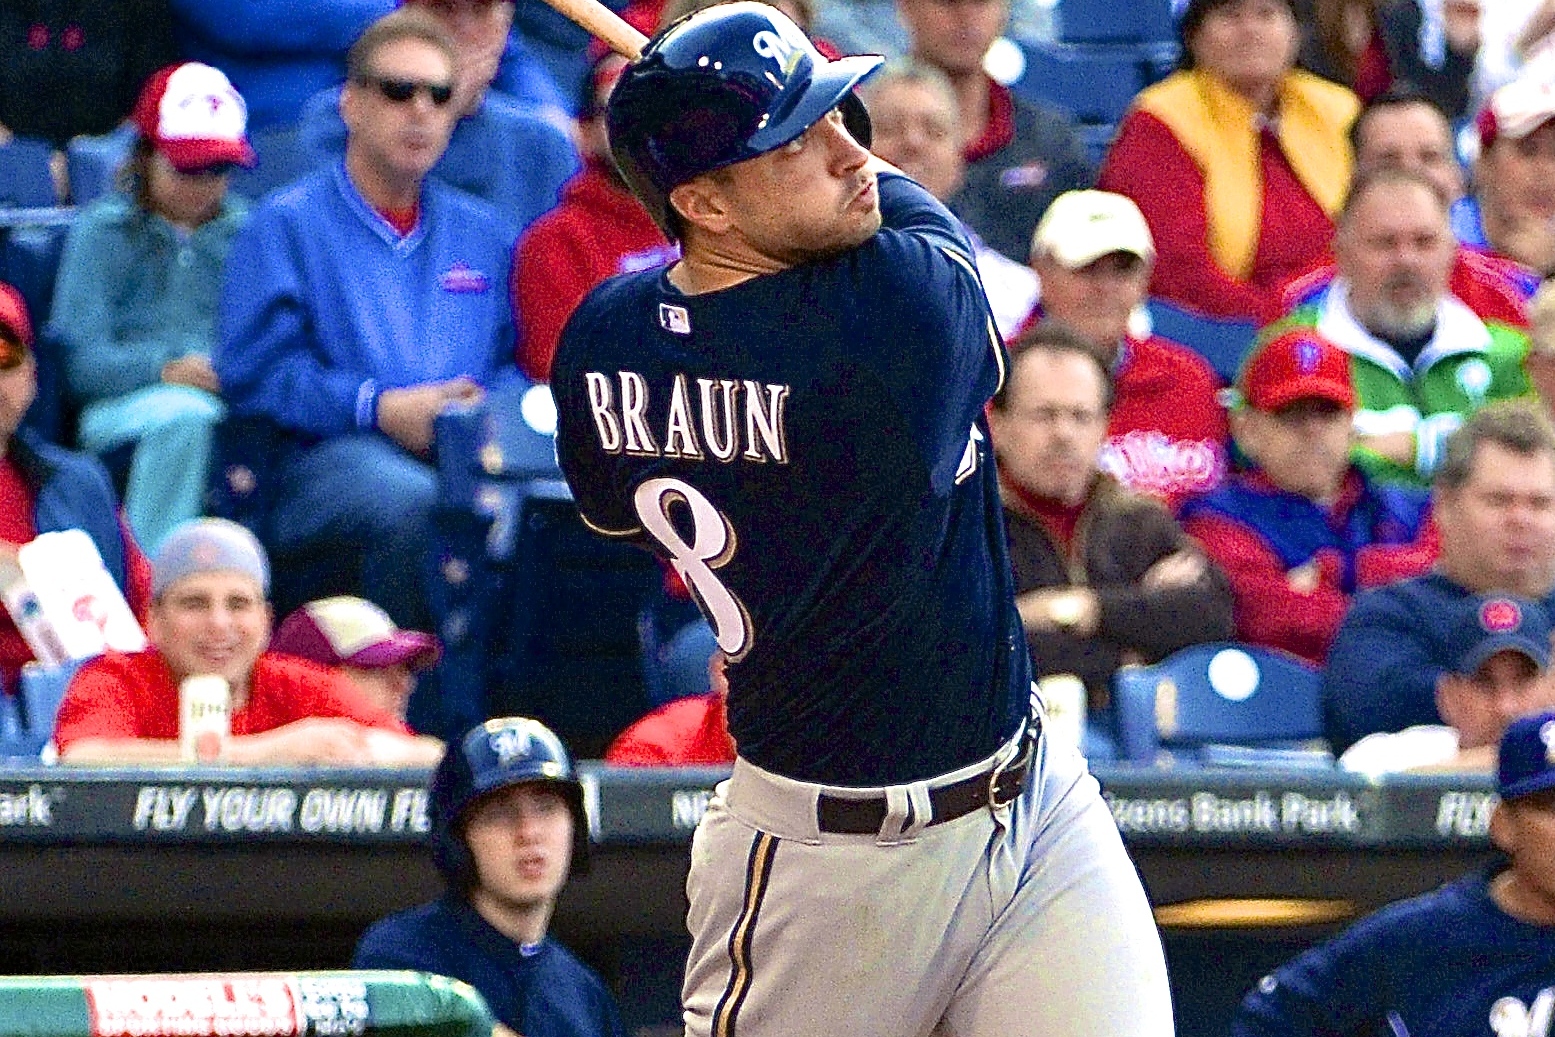 Disgraced MVP Ryan Braun hit a home run for the Milwaukee Brewers in his  first spring at-bat on Thursday